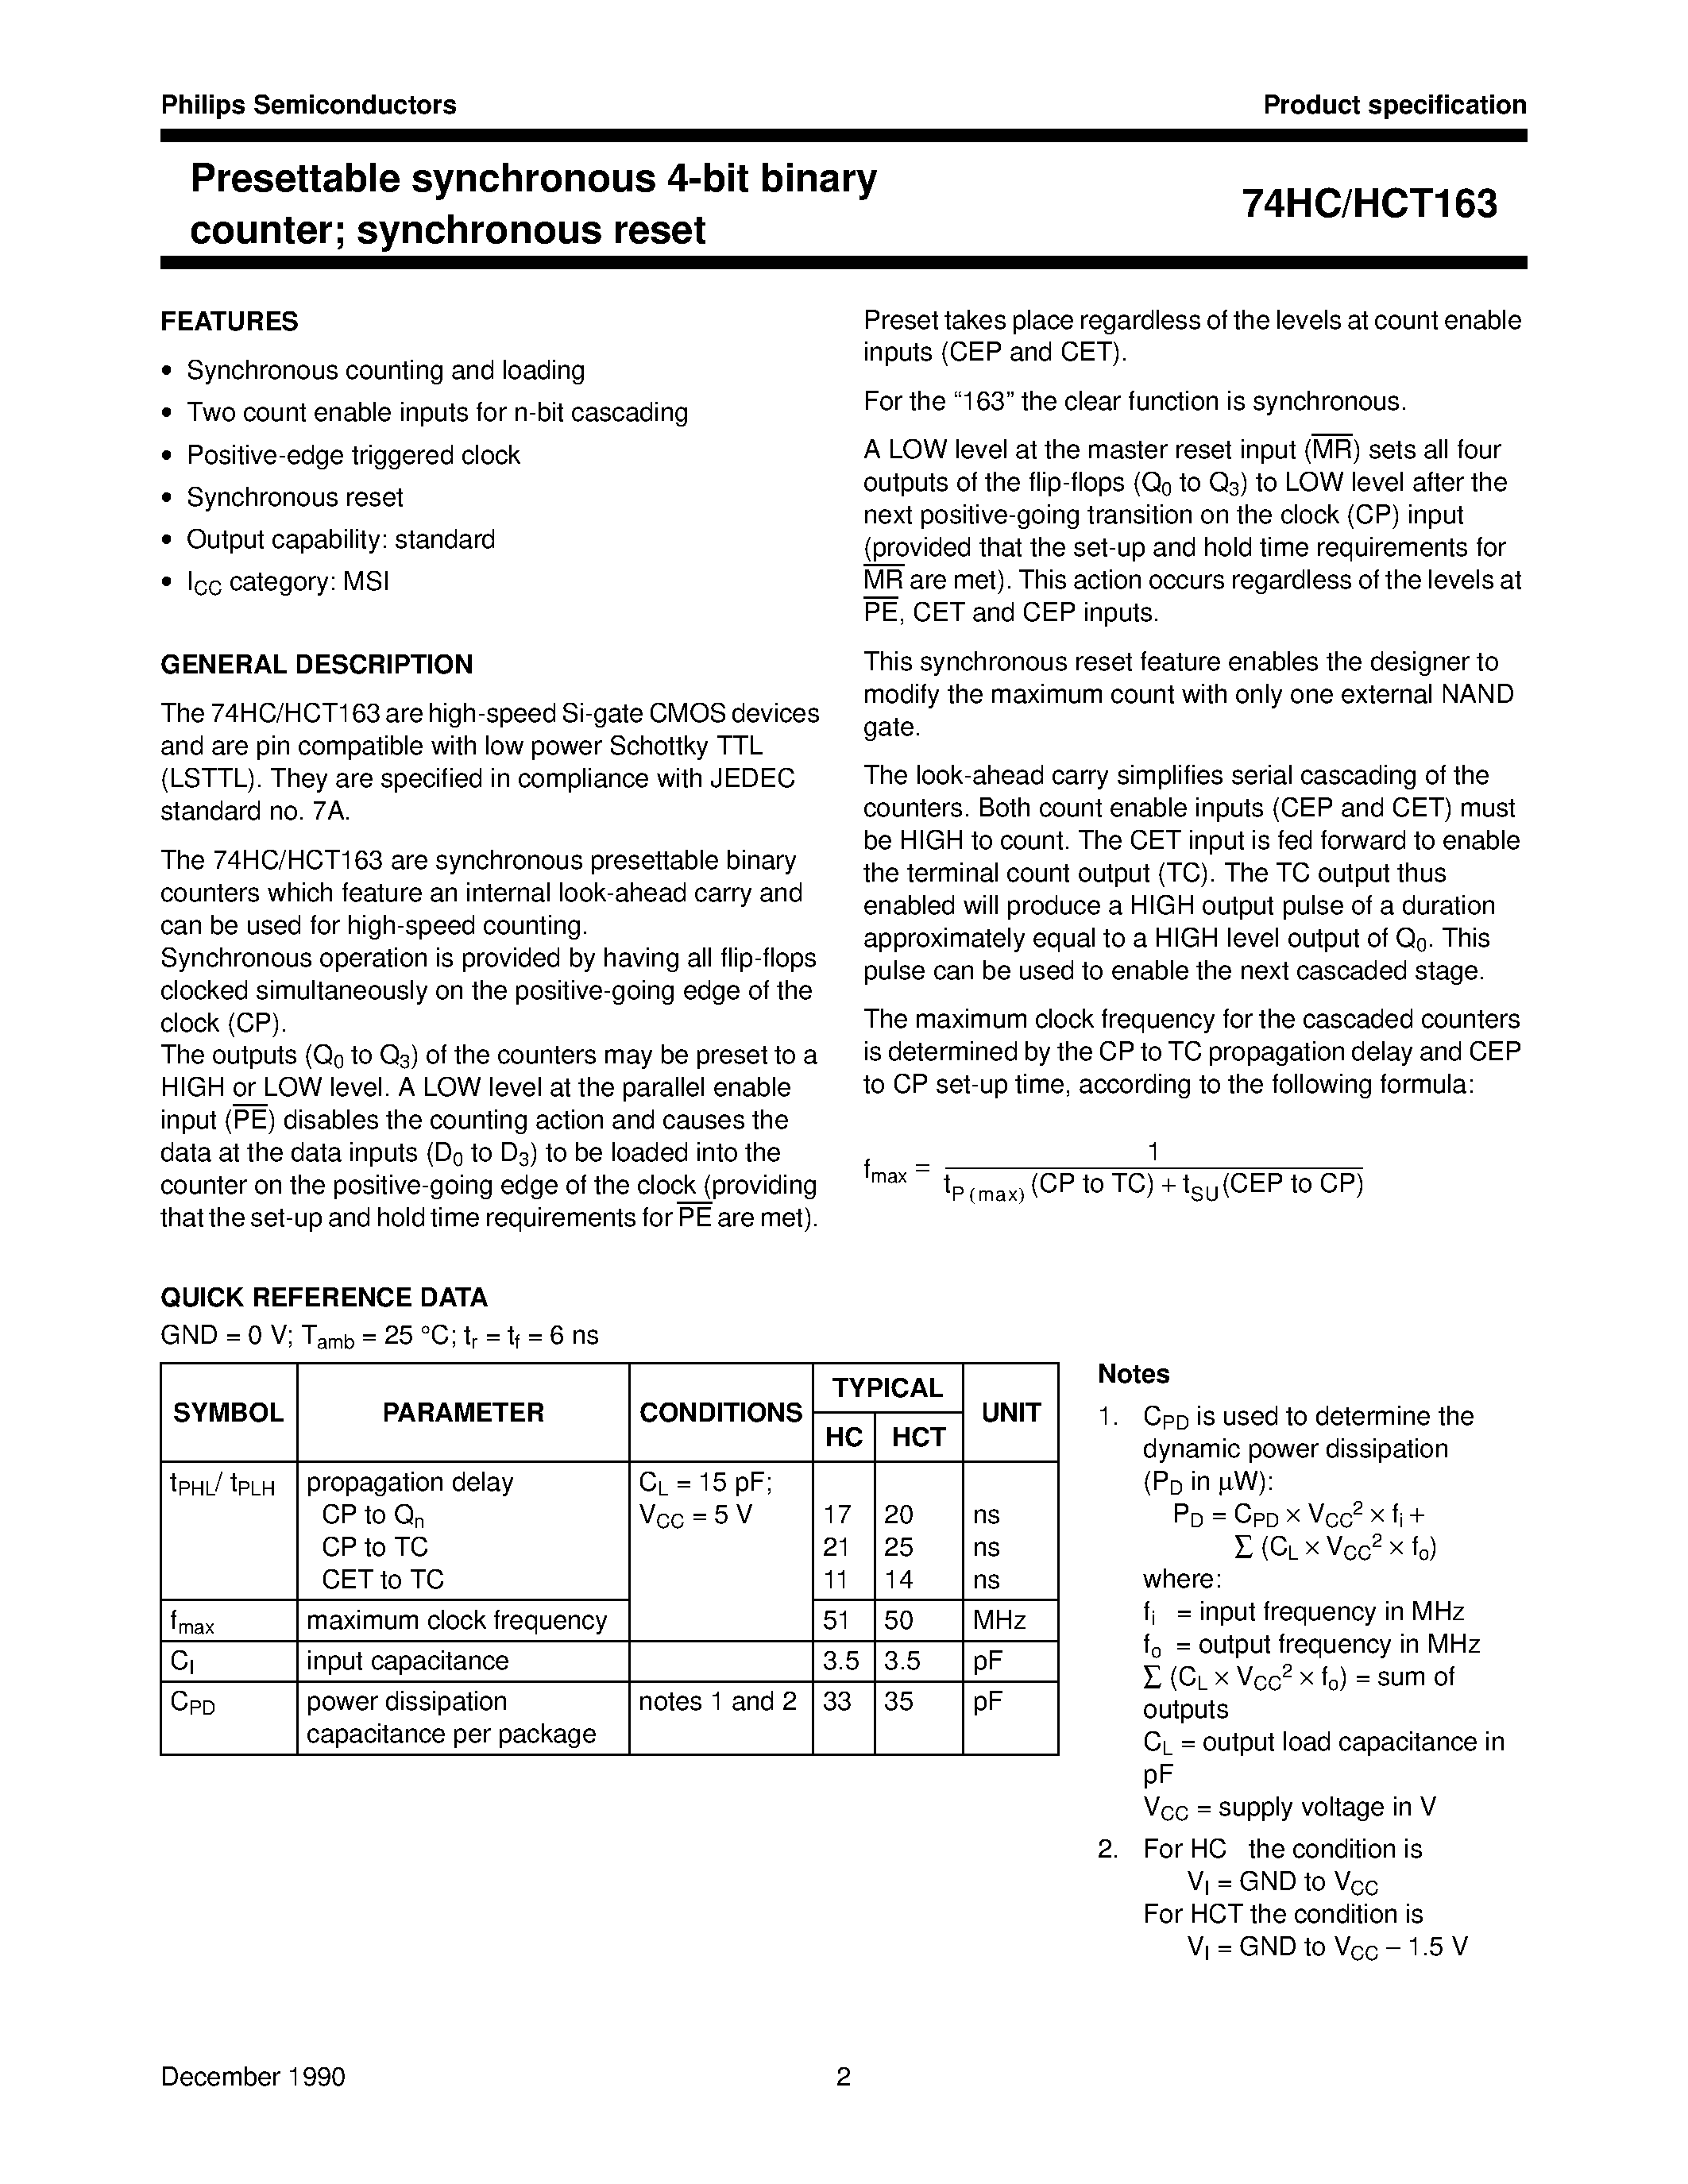 Datasheet 74HCT163 - Presettable synchronous 4-bit binary counter synchronous reset page 2